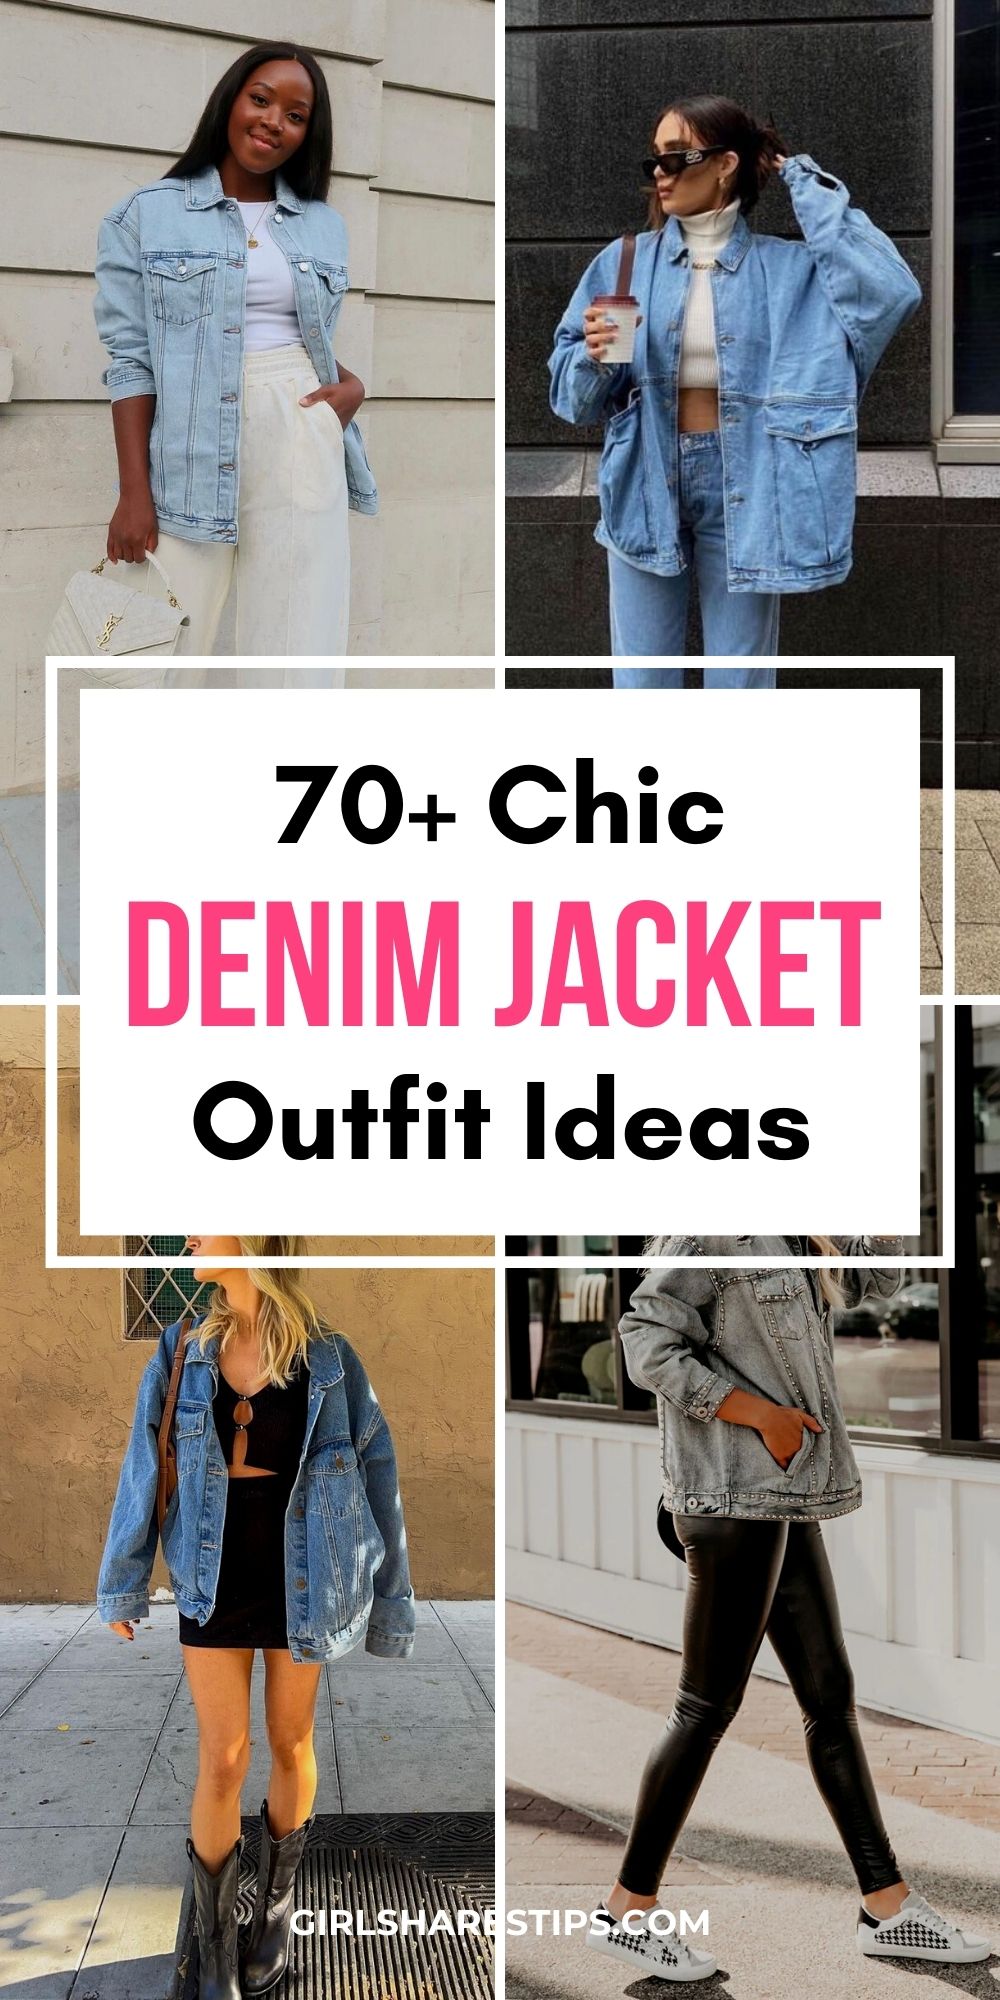 denim jacket outfit ideas collage